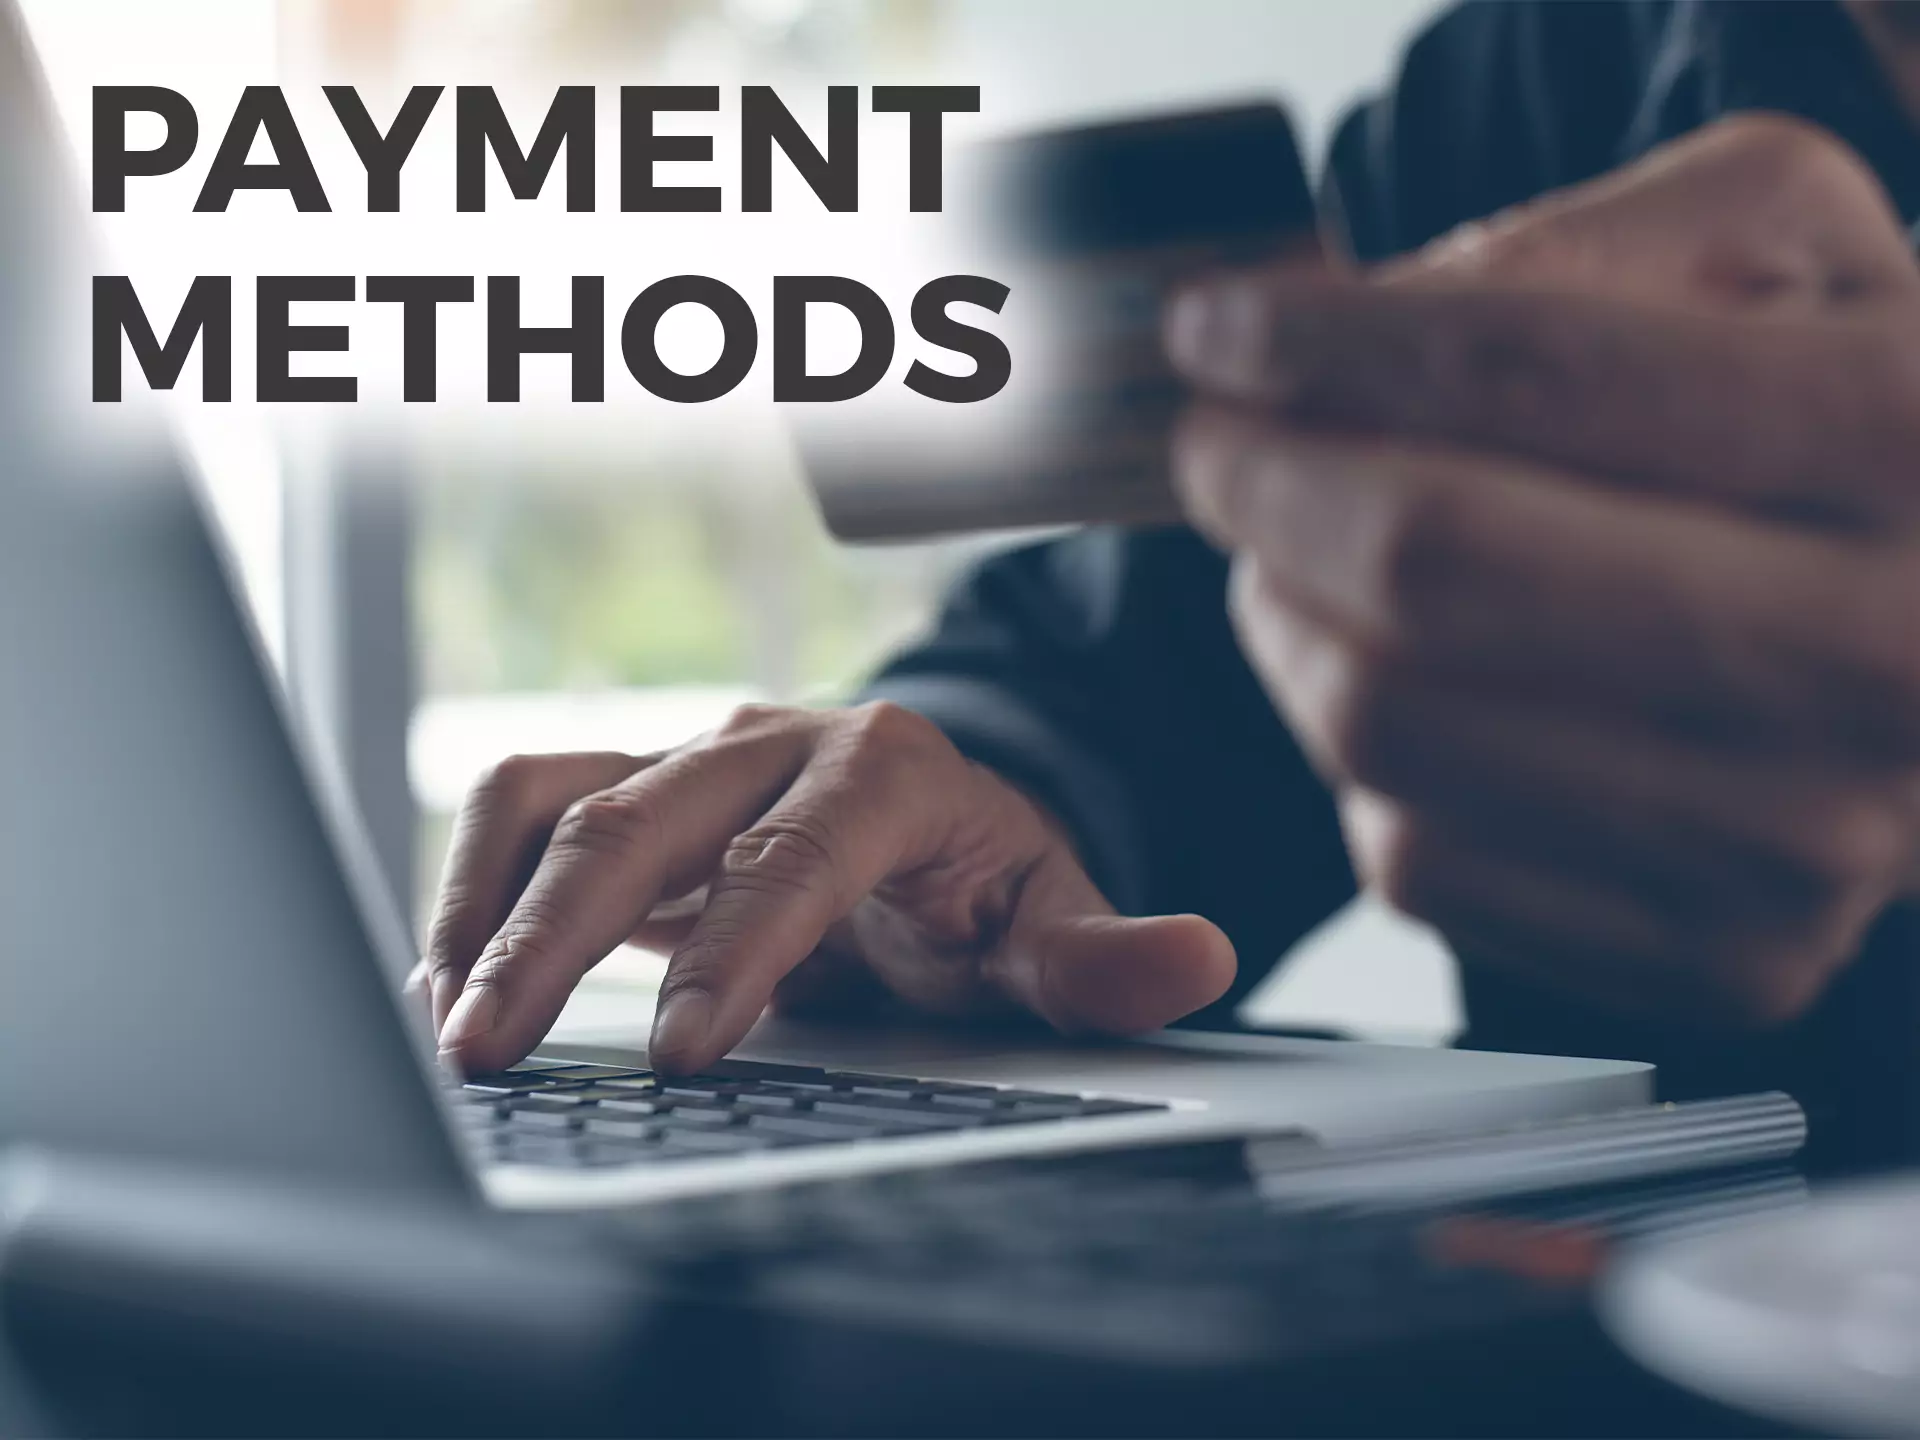 It's important for an online casino to have convenient payment methods.